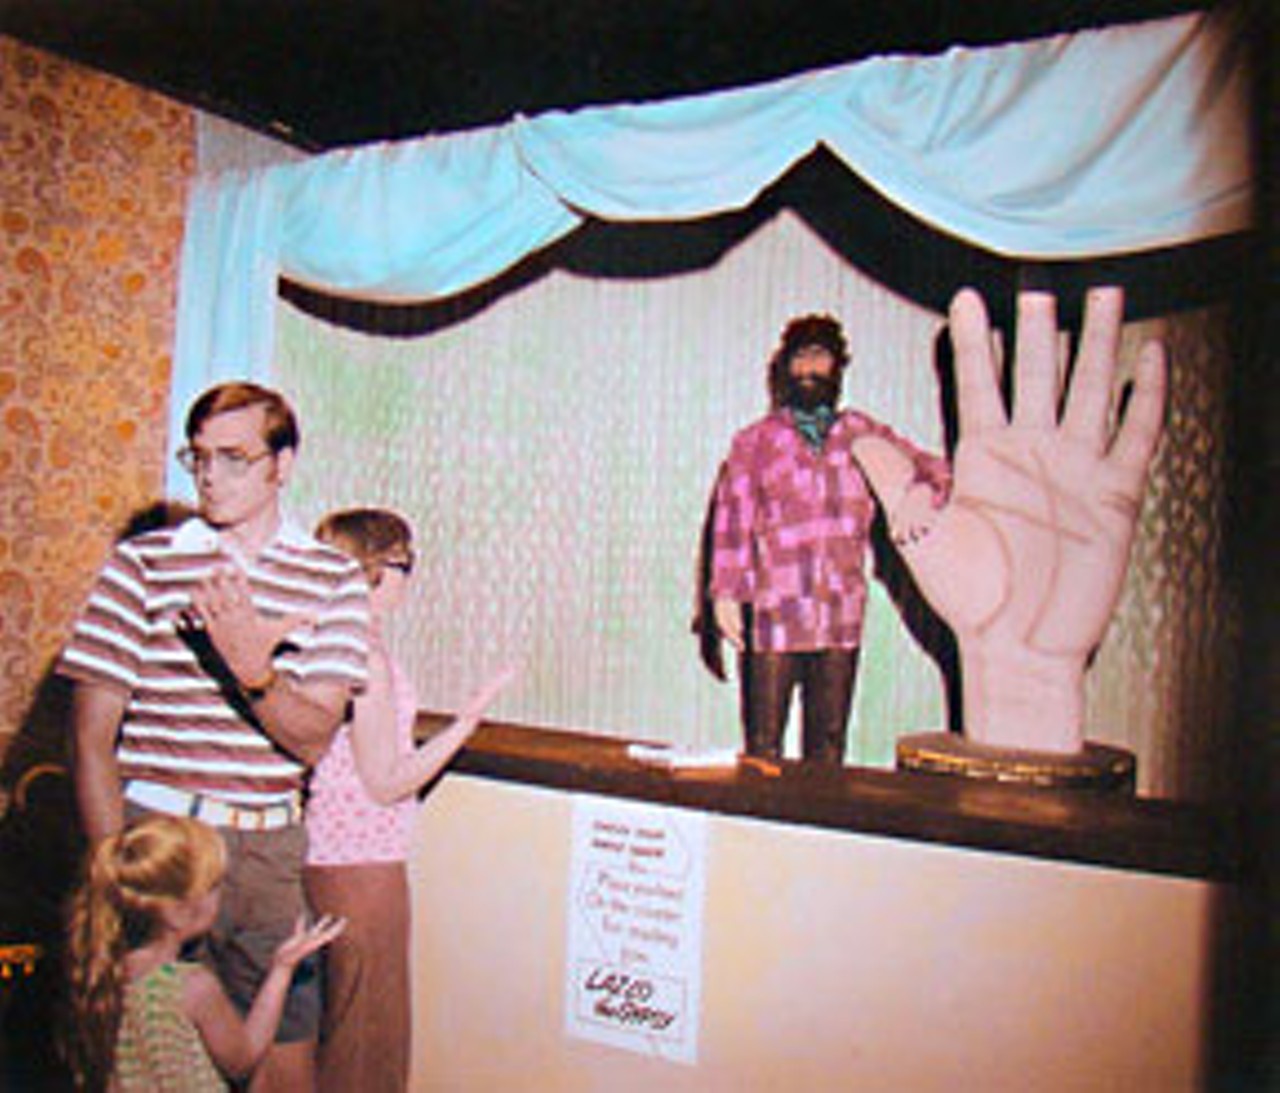 Mystery Fun House
Orlando
From 1976 until 2001, Mystery Fun House was a second-tier tourist attraction that operated in the I-Drive corridor in Orlando. It was an old-school fun house, with mirror mazes and creepy dungeon rooms and monsters and magic shows – and it was wildly popular with families in the 1970s and '80s. Today, it's a Westgate Resorts/Florida Visitors Welcome Center owned by Central Florida Investments.